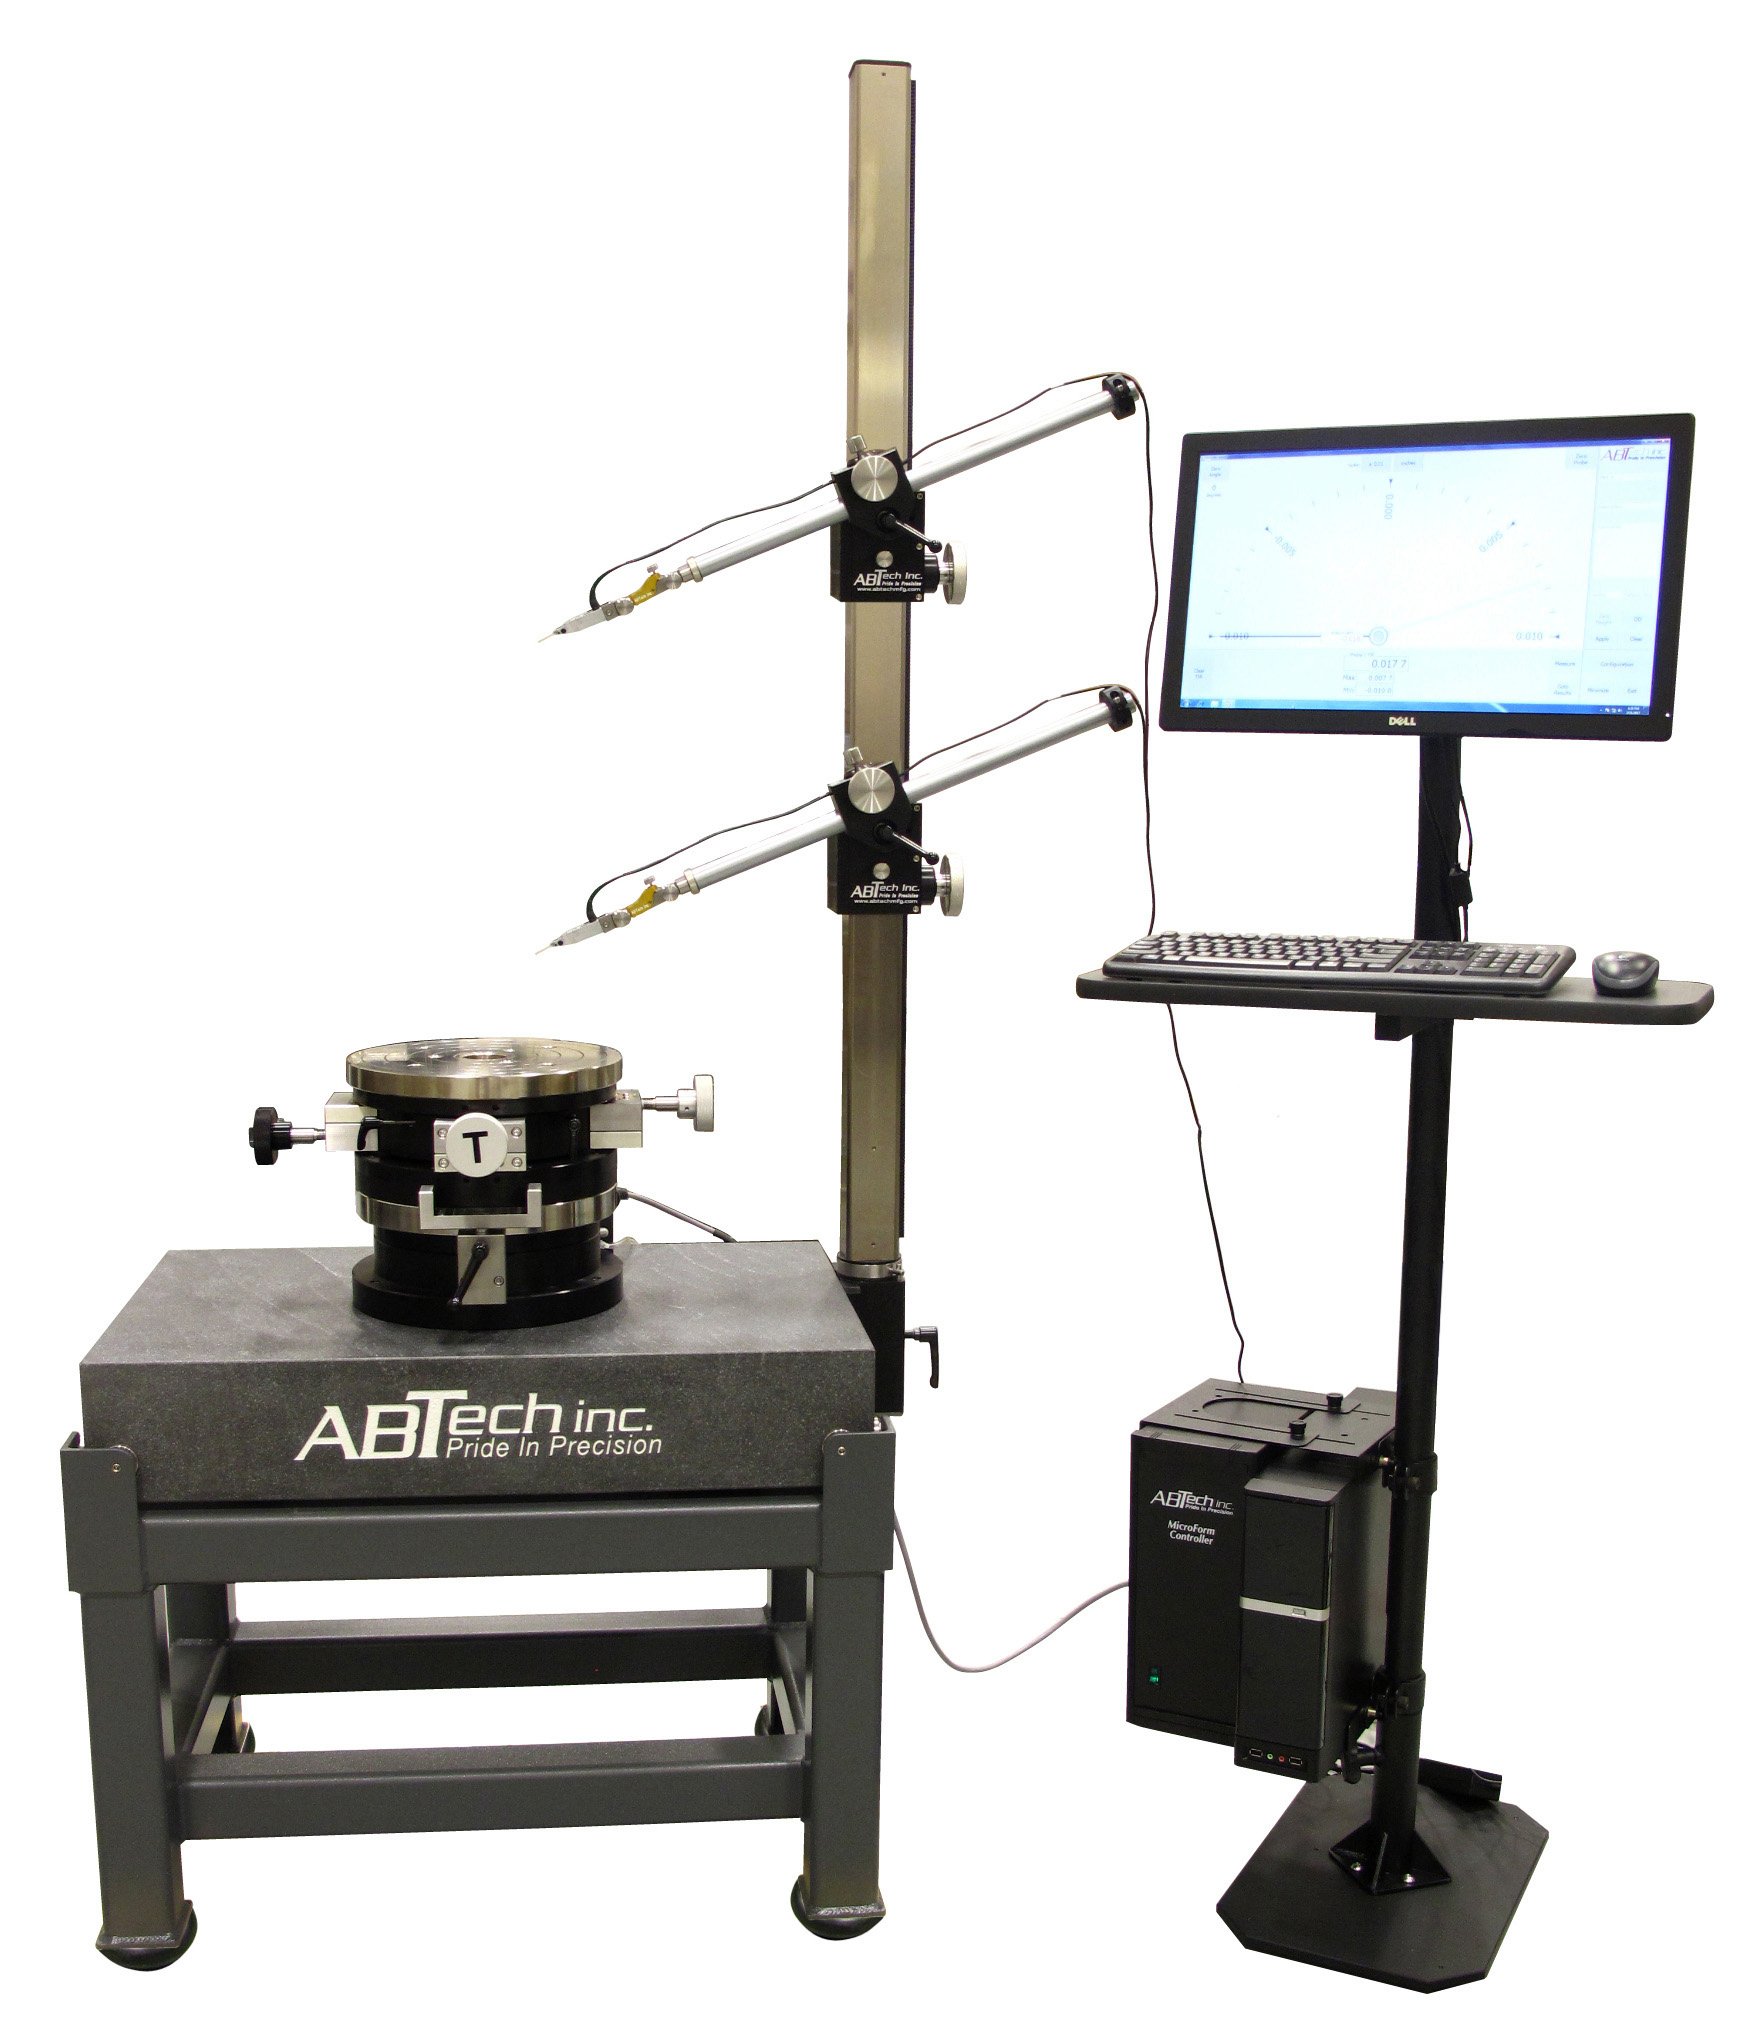 EAS500 MicroTIR with 1 tower and 2 probes